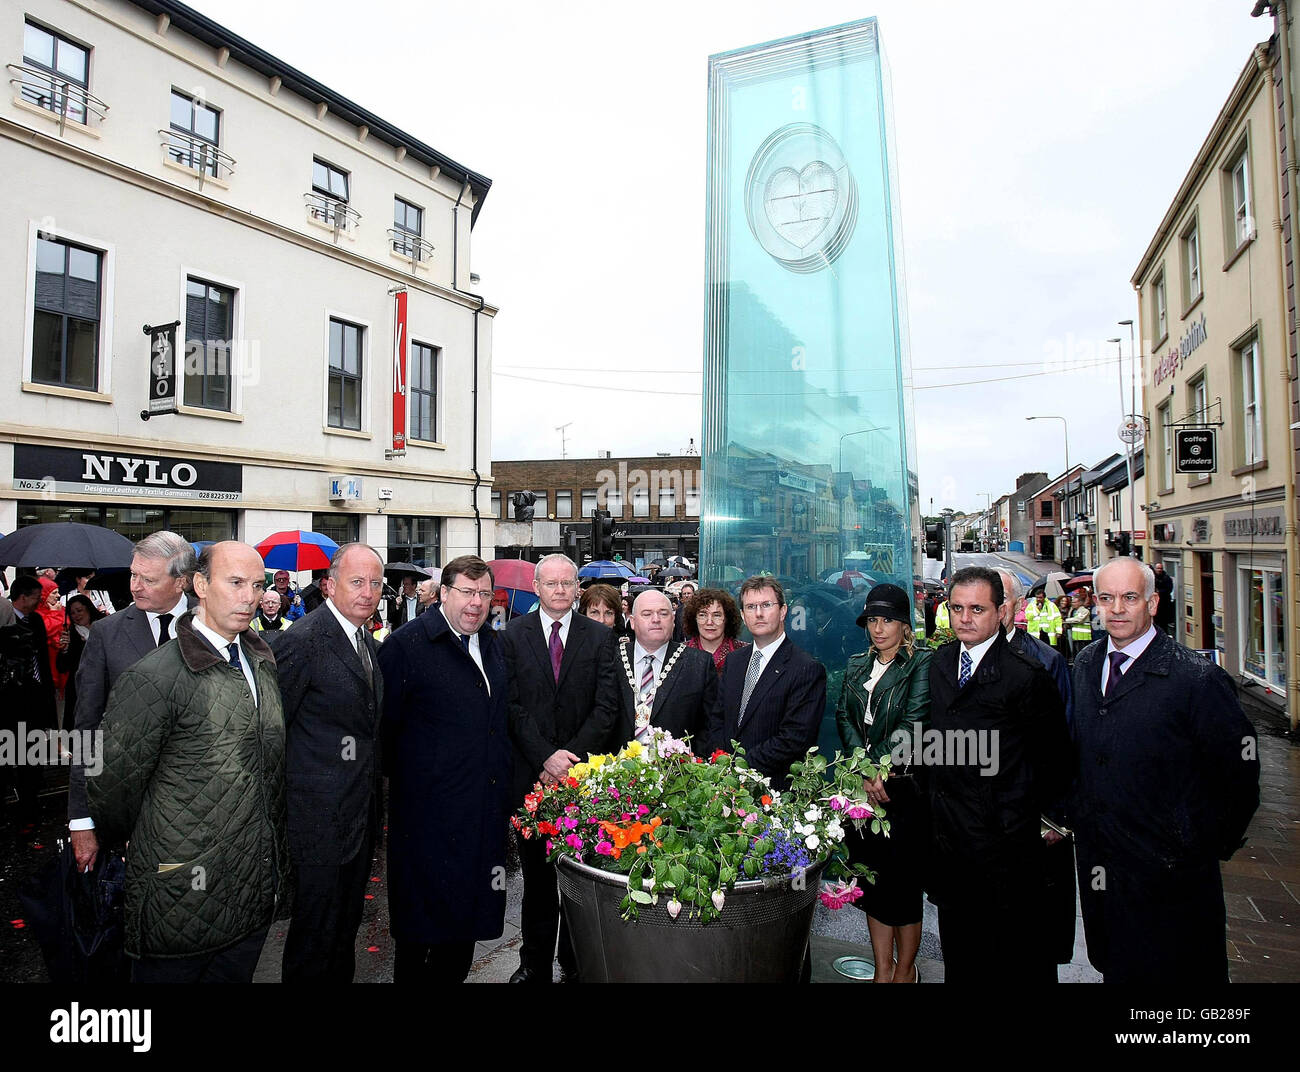 Secretary of State for Northern Ireland Shaun Woodward (second from left), Irish Taoiseach Brian Cowen (third from left) Deputy First Minister Martin McGuinness (centre), join other delegates at the site of the 1998 Omagh bomb. Stock Photo